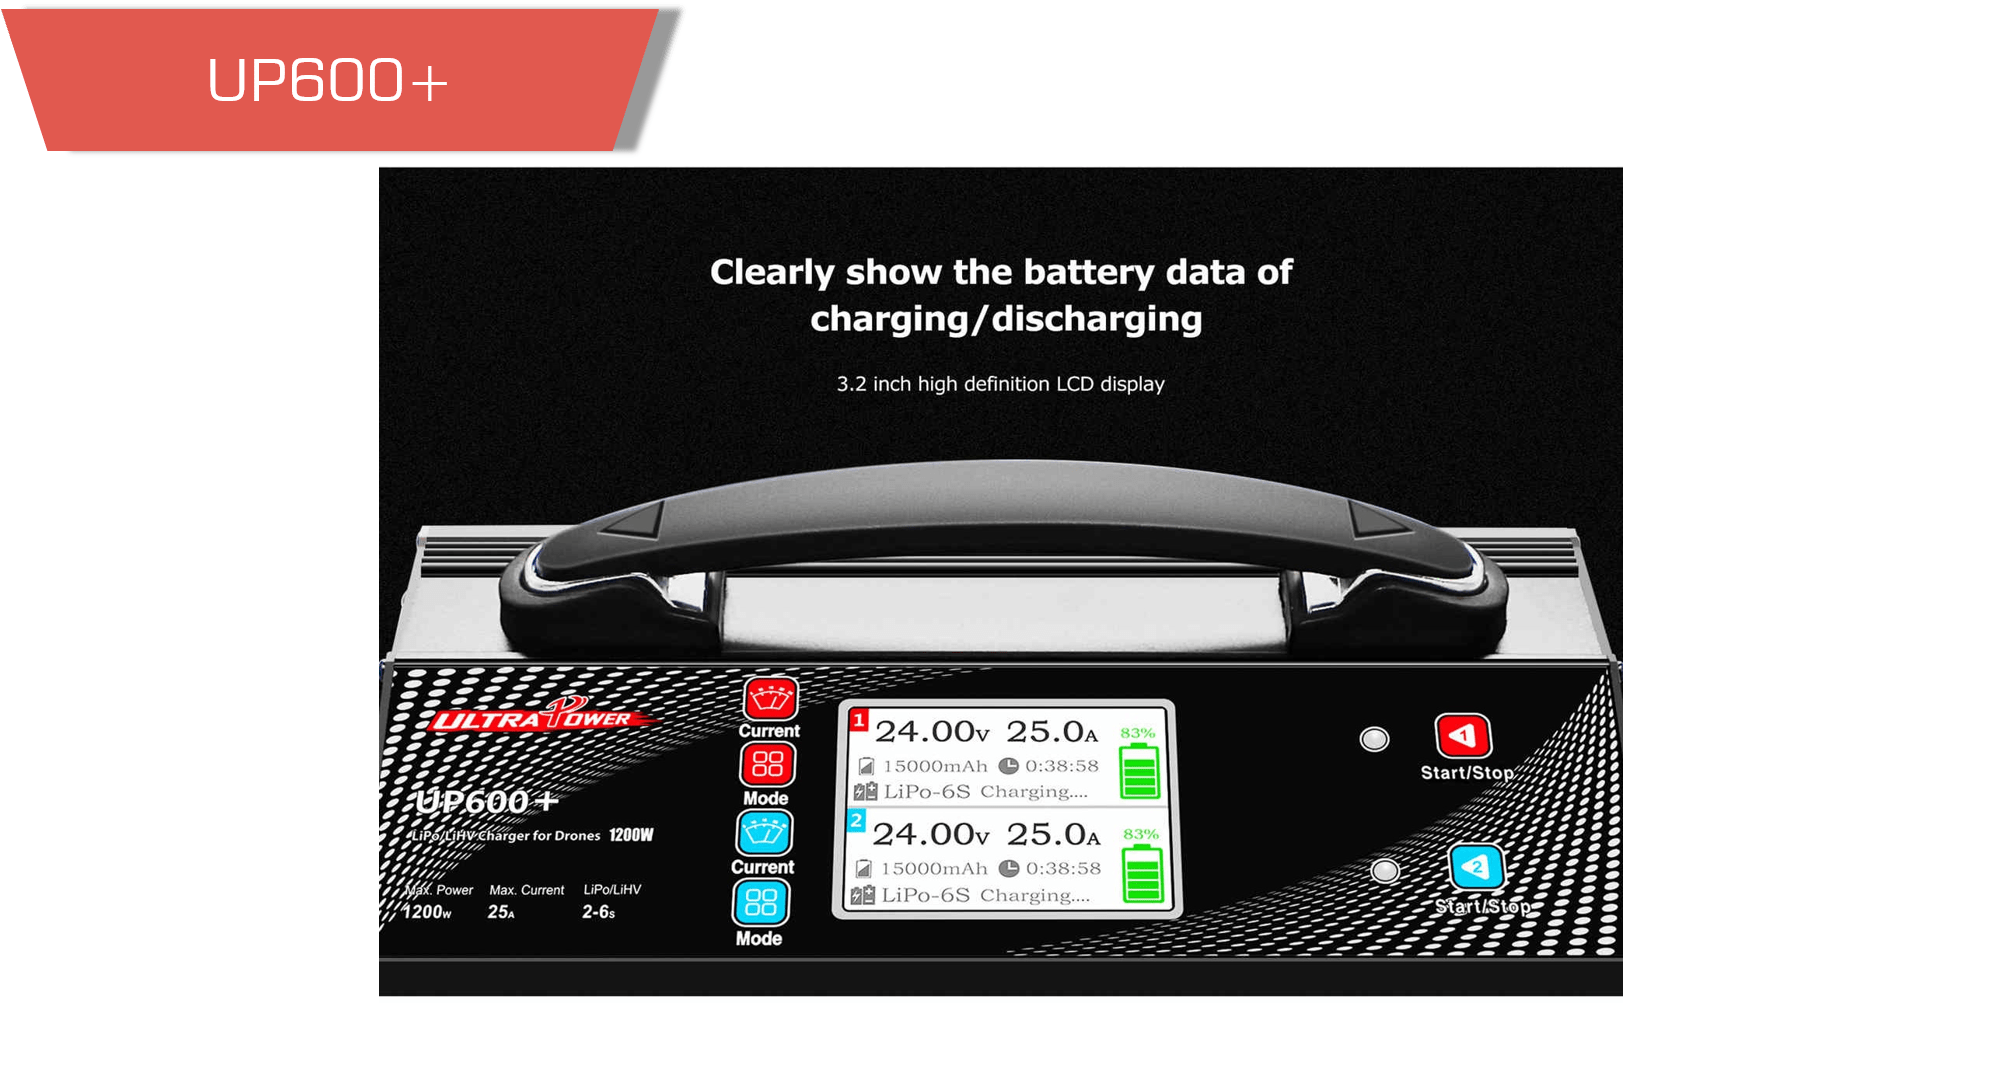 13 - up600 plus,up600+,1200w charger,lipo charger,dual charger - motionew - 7